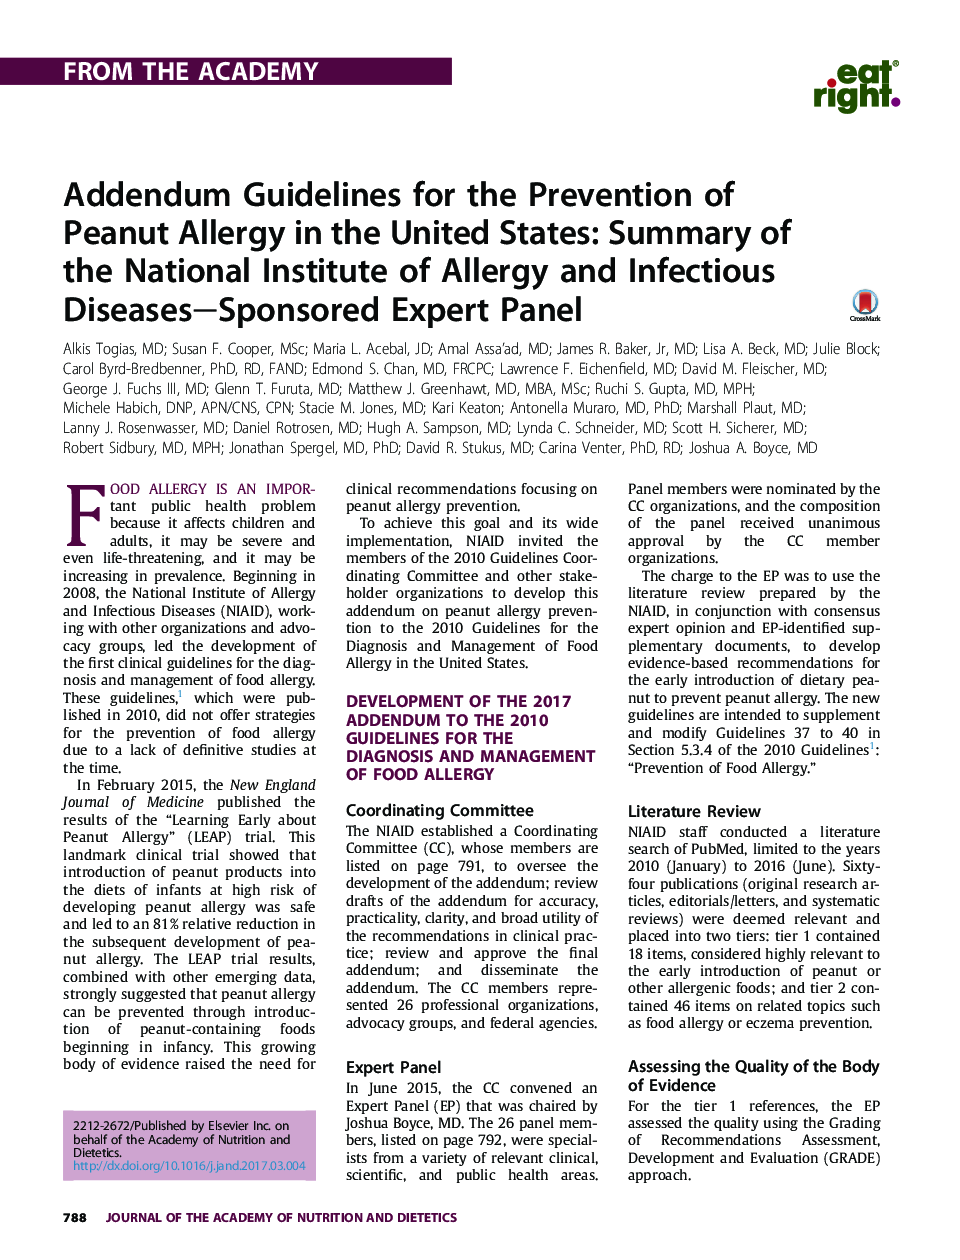 Addendum Guidelines for the Prevention of Peanut Allergy in the United States: Summary of the National Institute of Allergy and Infectious Diseases-Sponsored Expert Panel